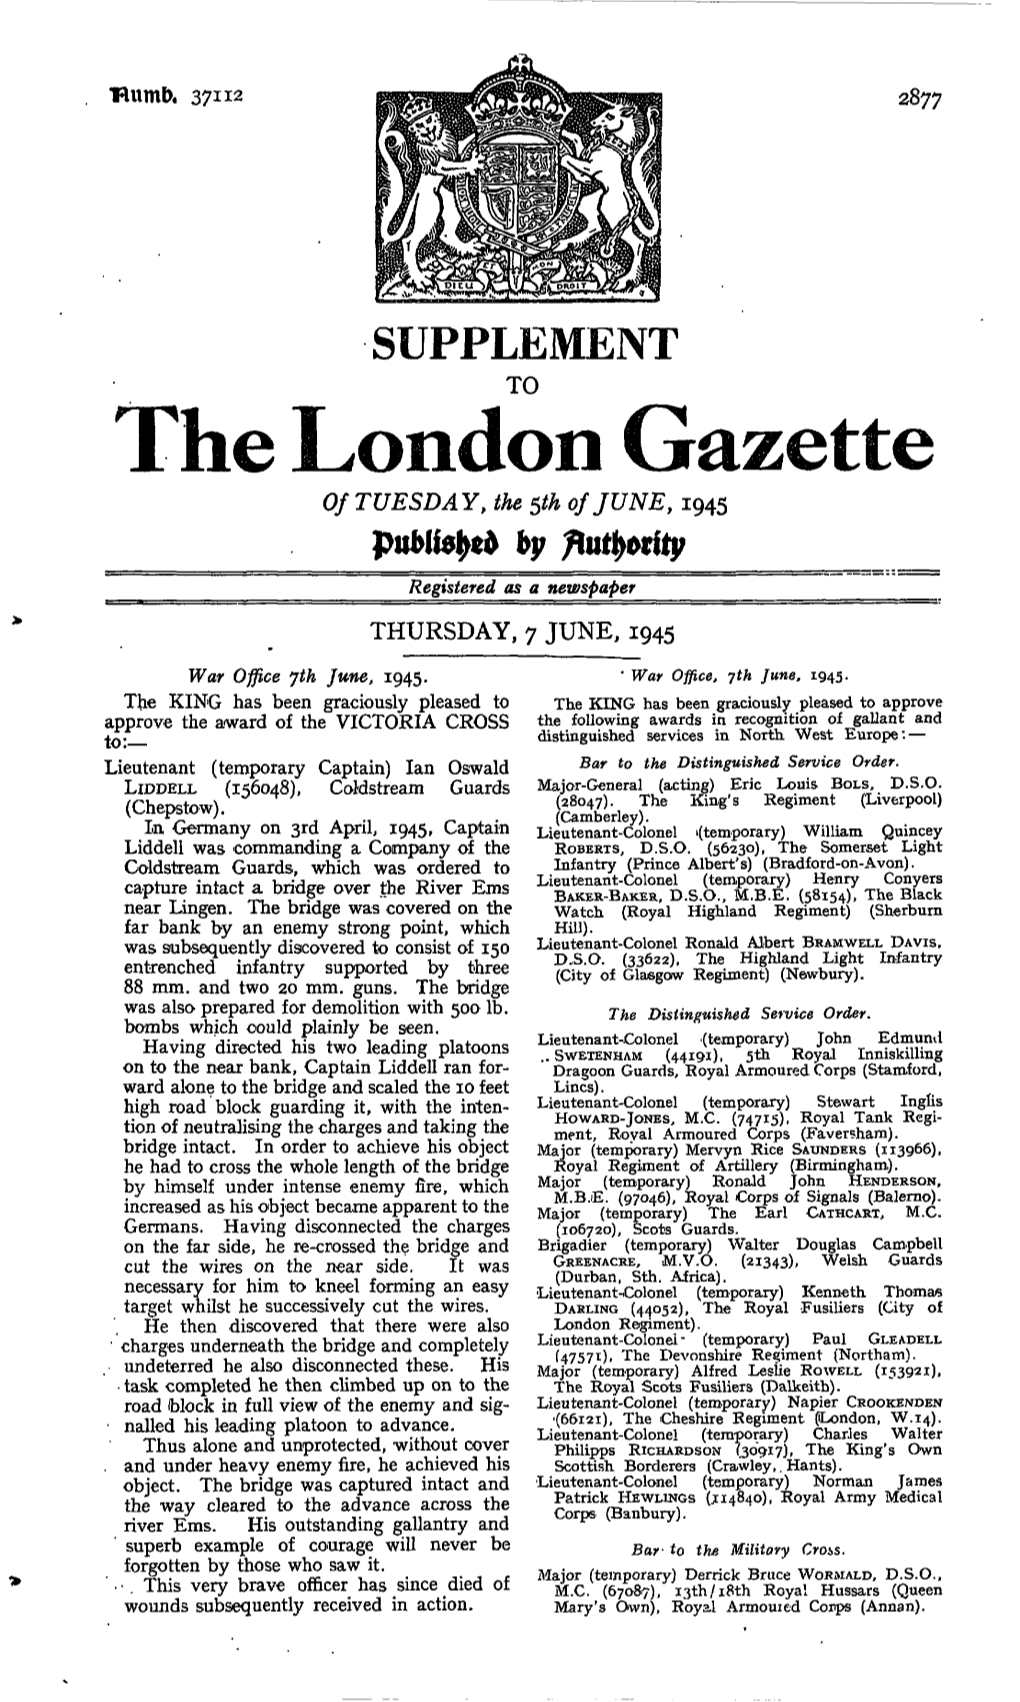 The London Gazette of TUESDAY, the &H of JUNE, 1945 by Registered As a Newspaper THURSDAY, 7 JUNE, 1945